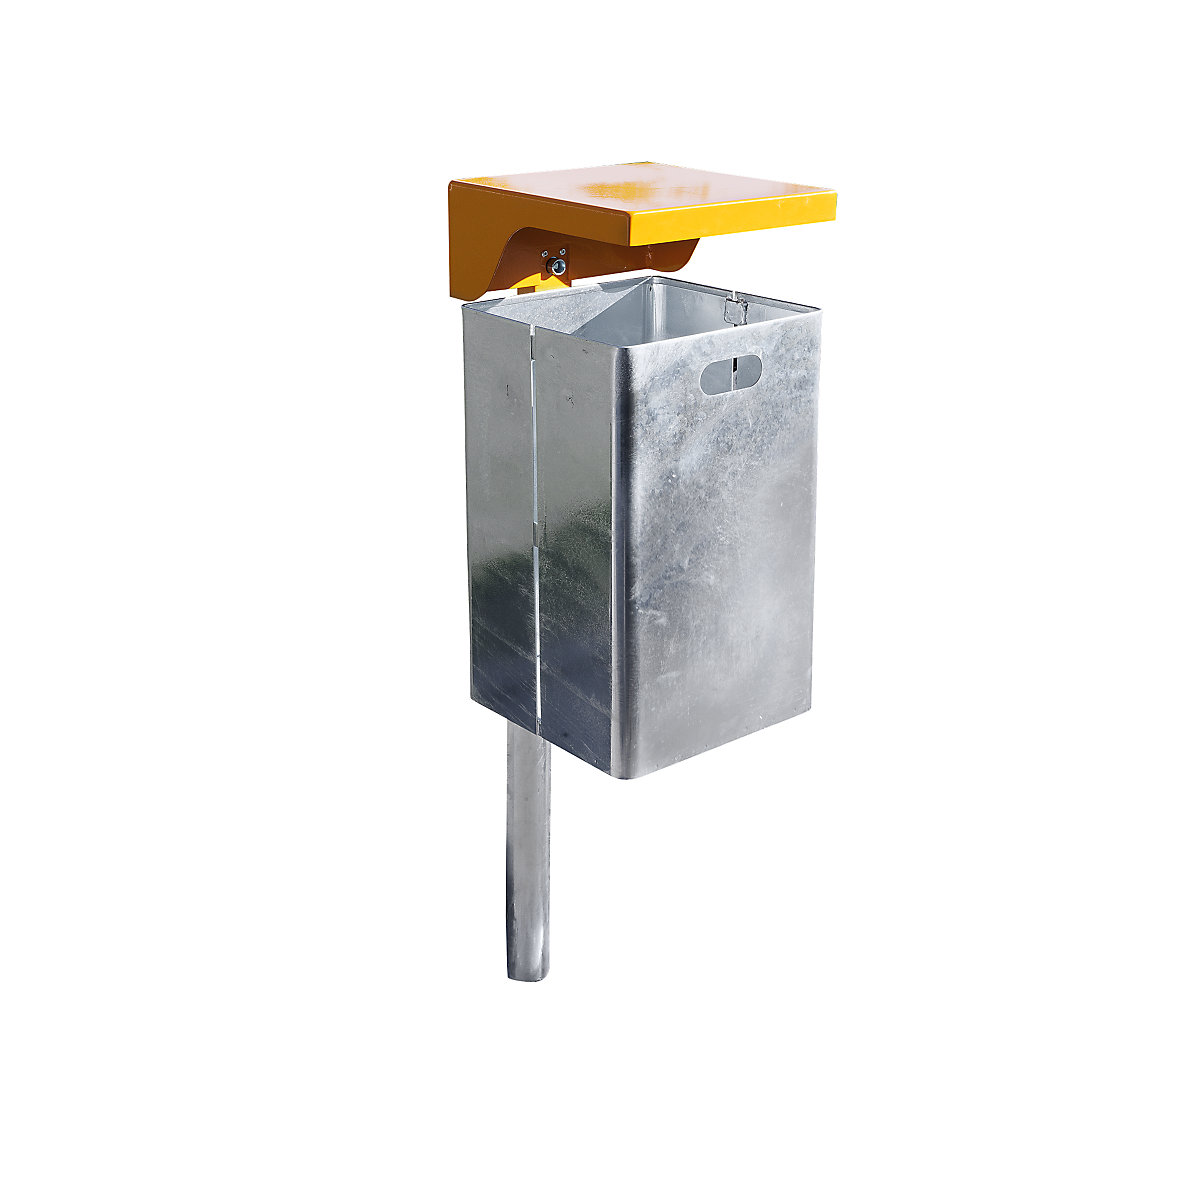 Waste collector for outdoor use, hot dip galvanised, capacity 40 l, WxHxD 310 x 600 x 360 mm, orange hood-3